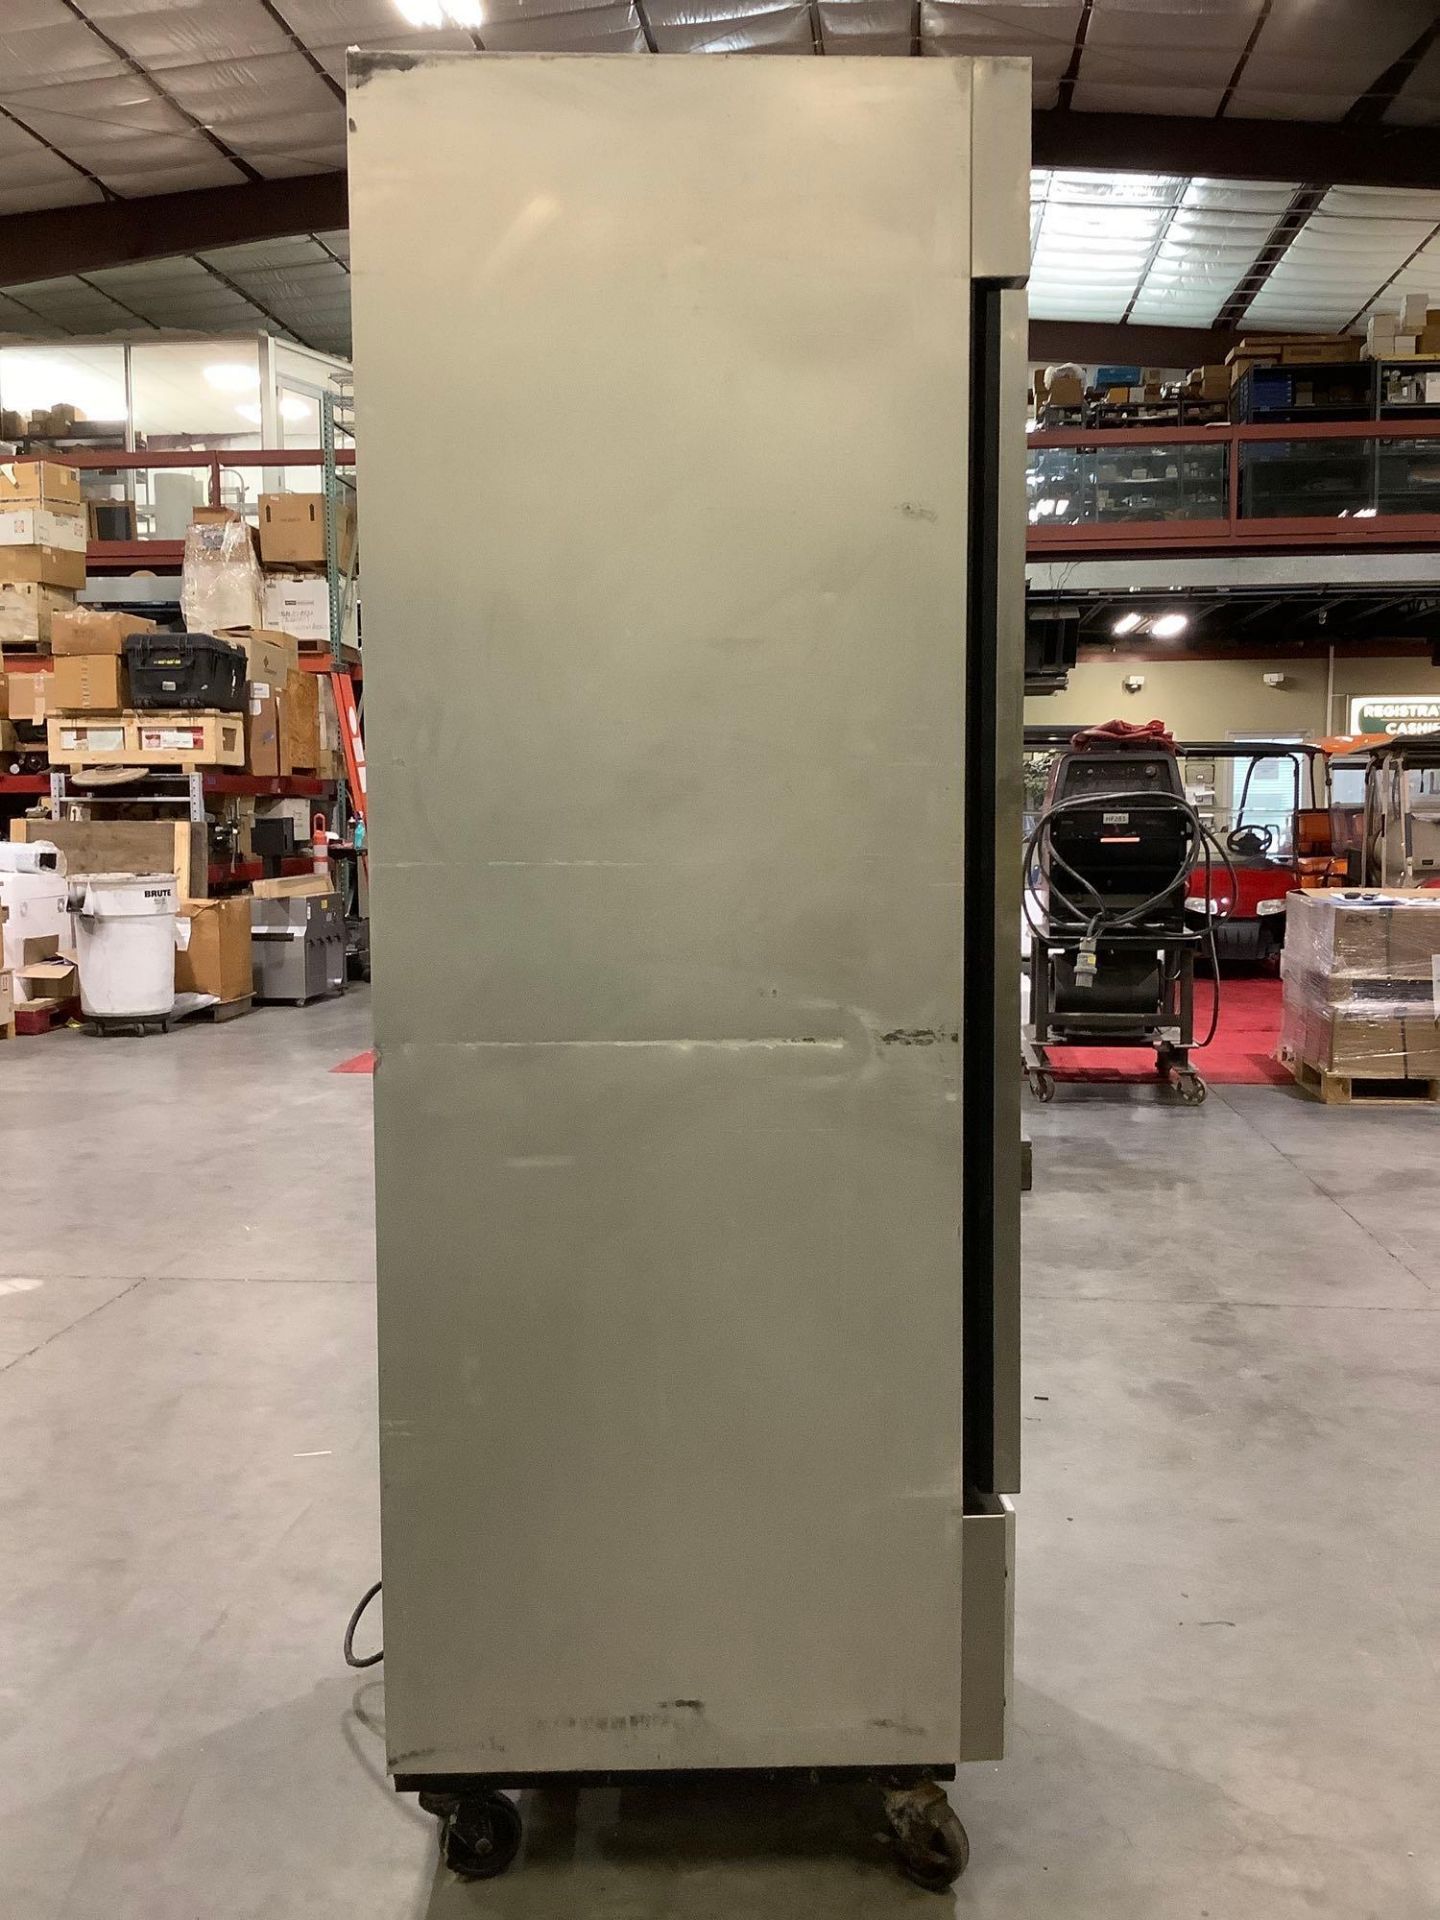 TRUE COMMERCIAL SINGLE DOOR REFRIGERATOR MODEL T-19F, APPROX 27” W x 30” L x 84” T, WORKS - Image 19 of 20